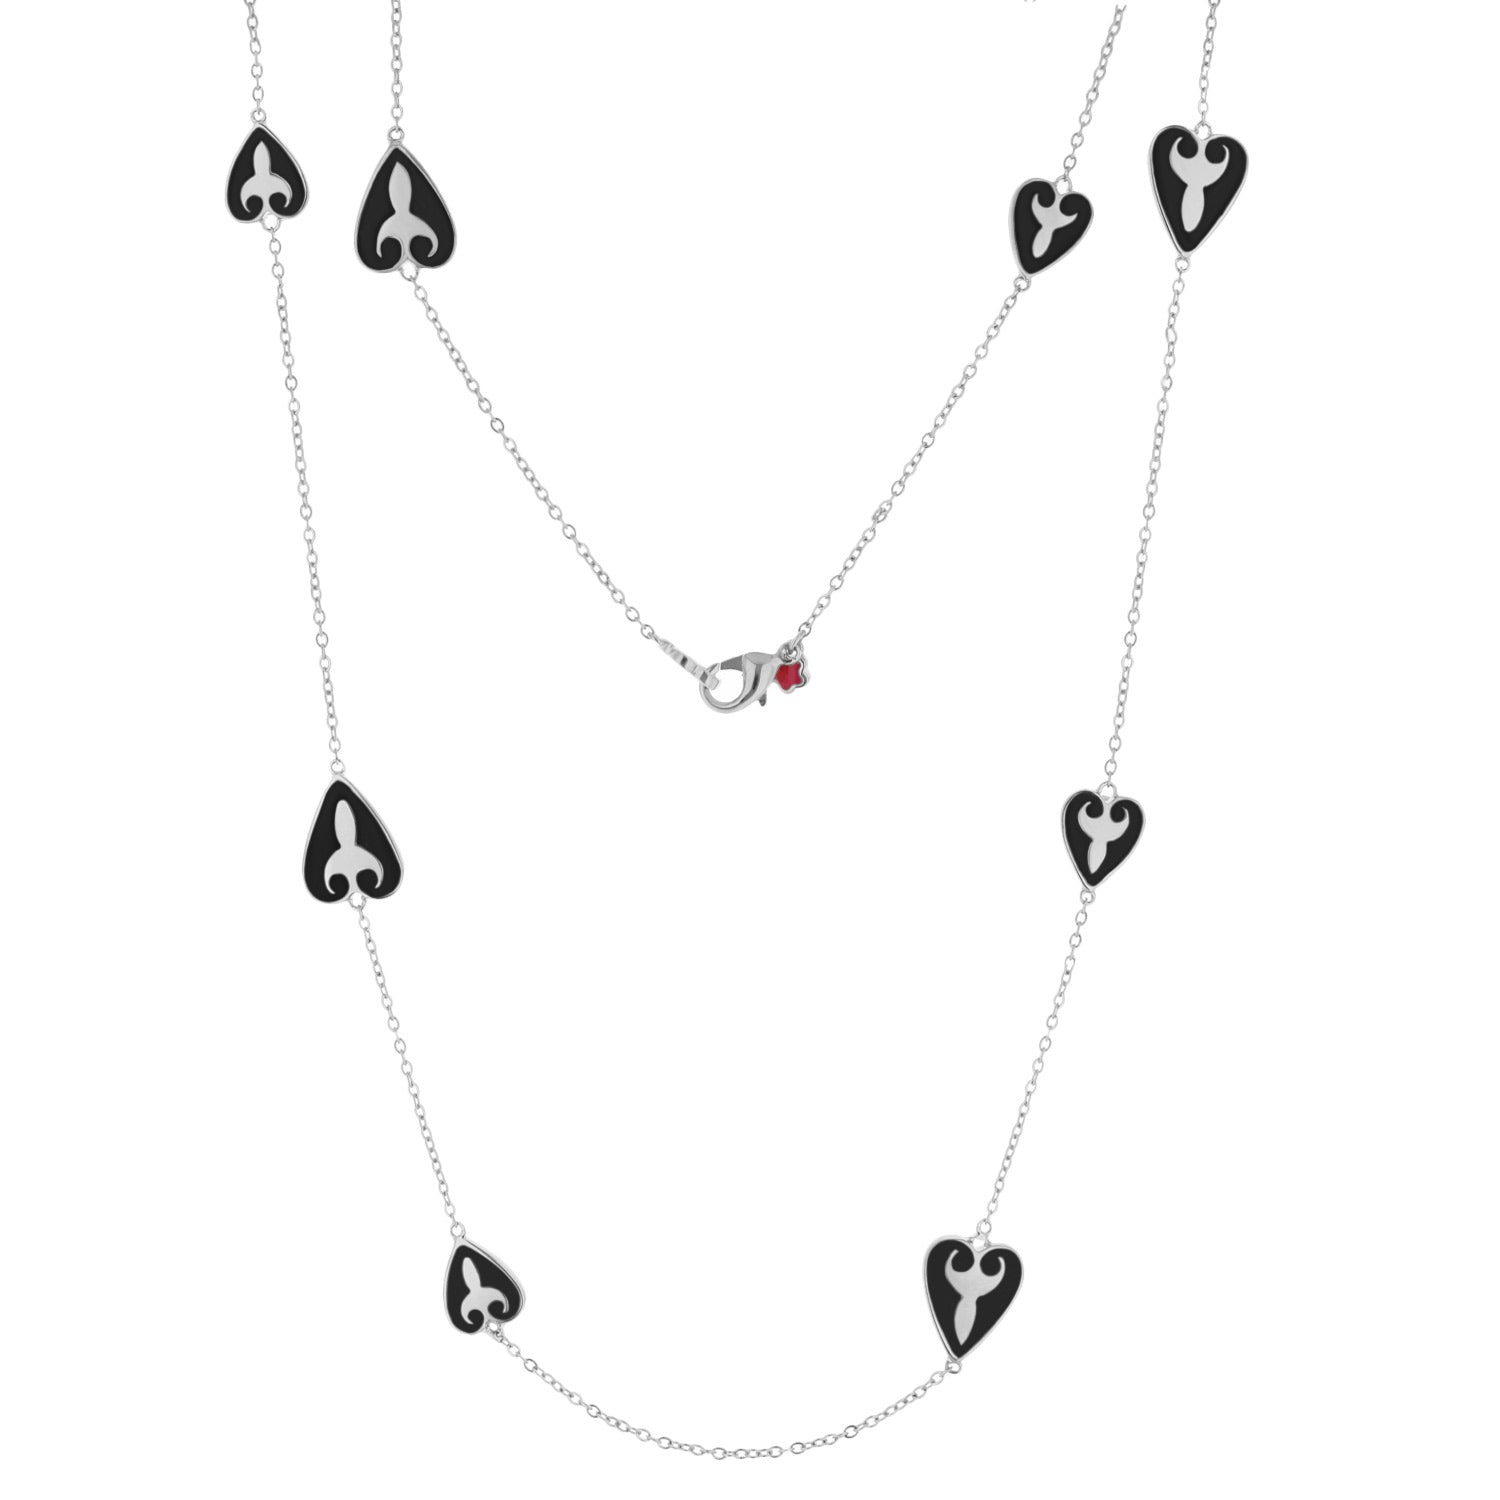 Bows and Hearts Necklace